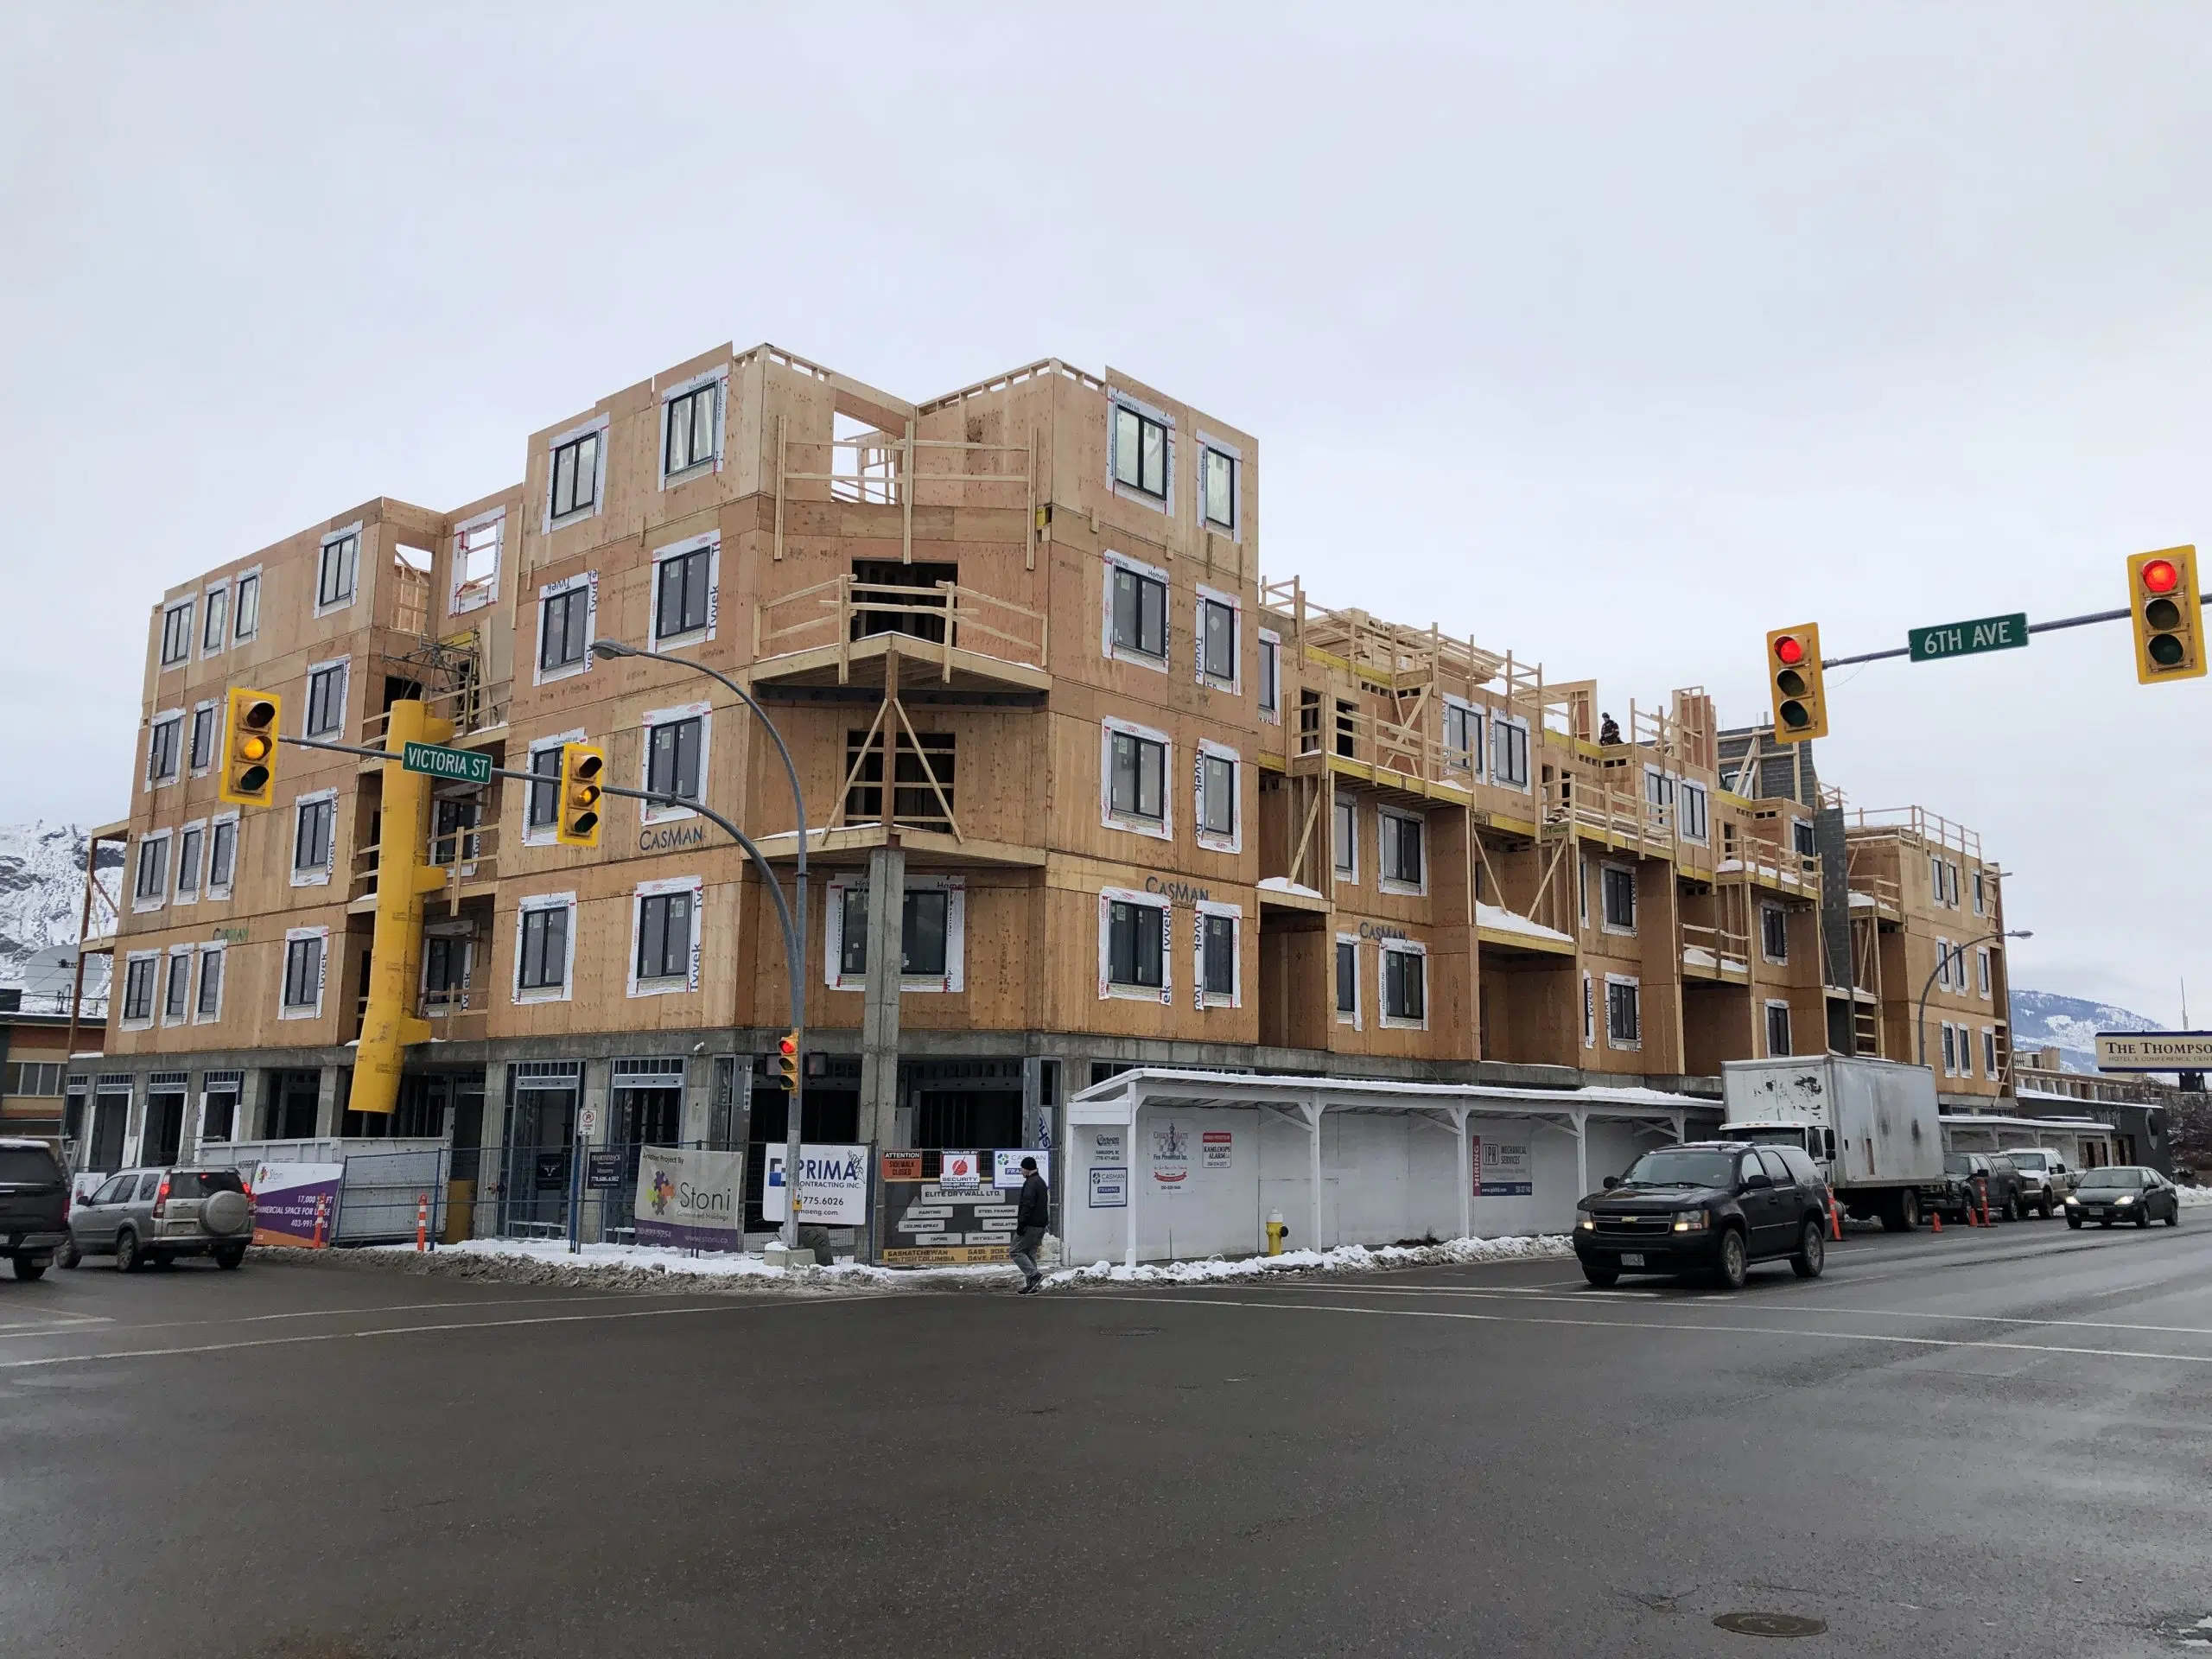 Kamloops asking to be included in future federal housing announcements after recent snub